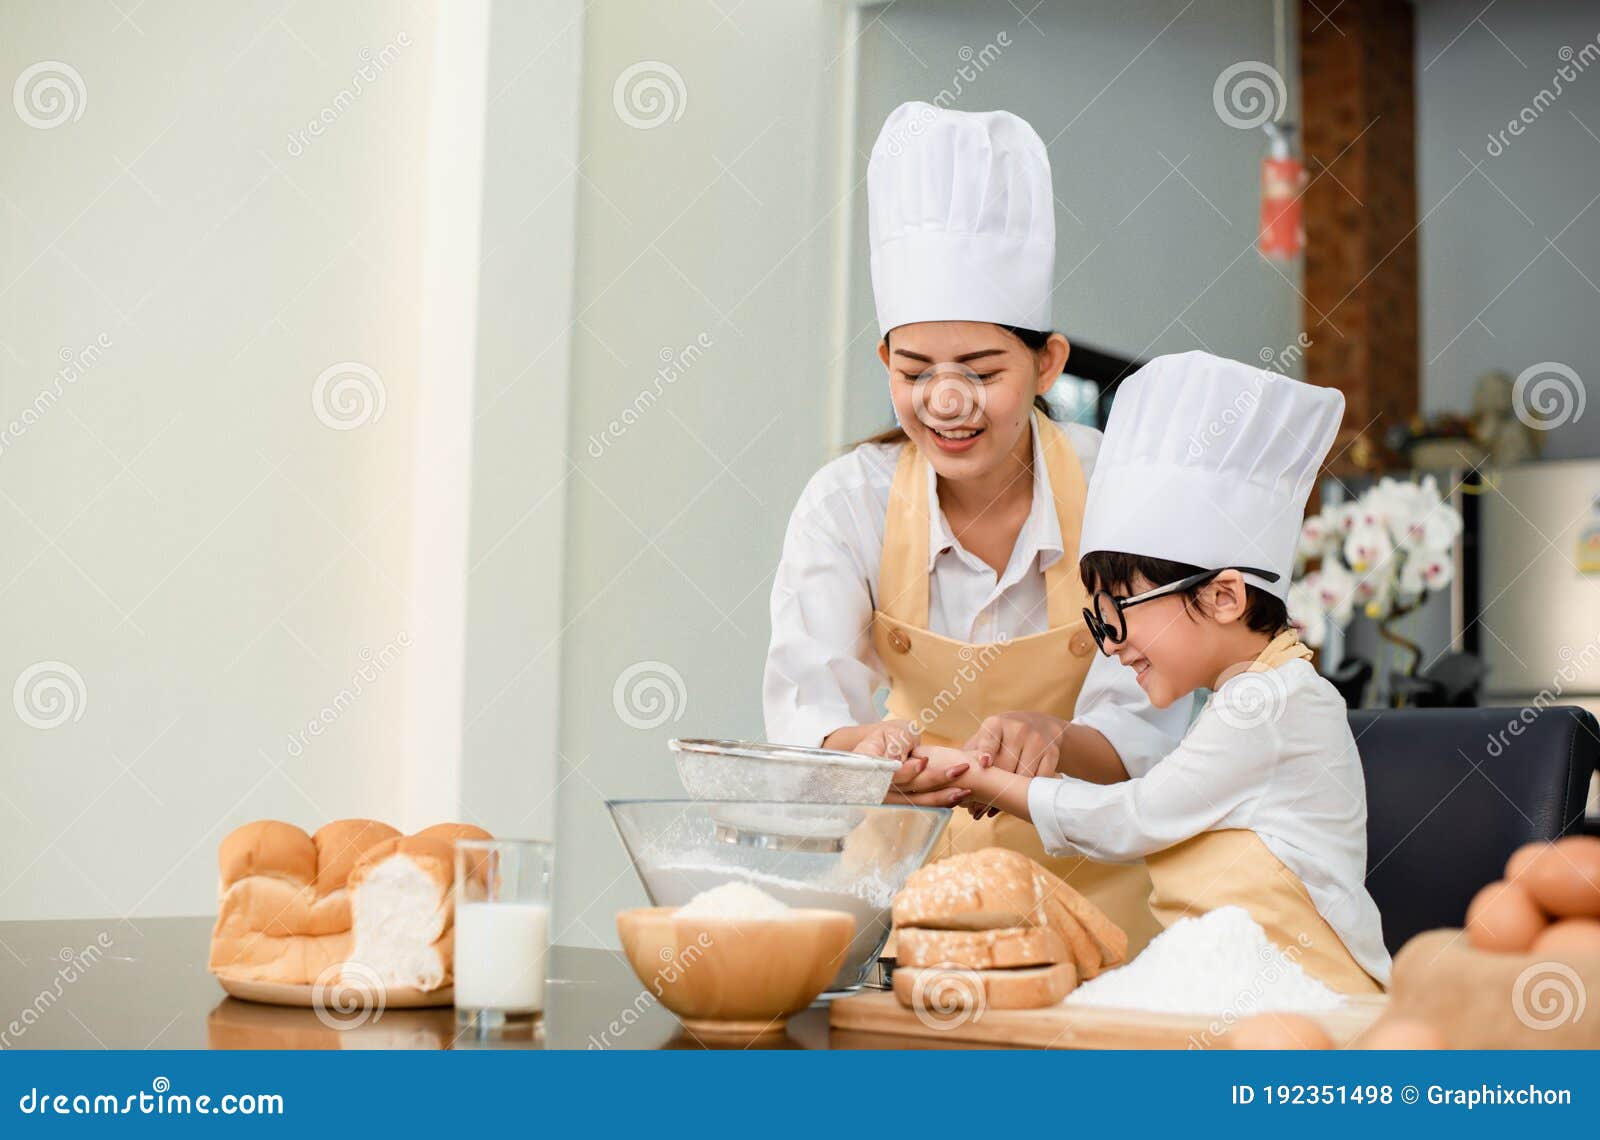 Mom Teaching Son For Cooking Food Mother And Kid Daily Lifestyle At